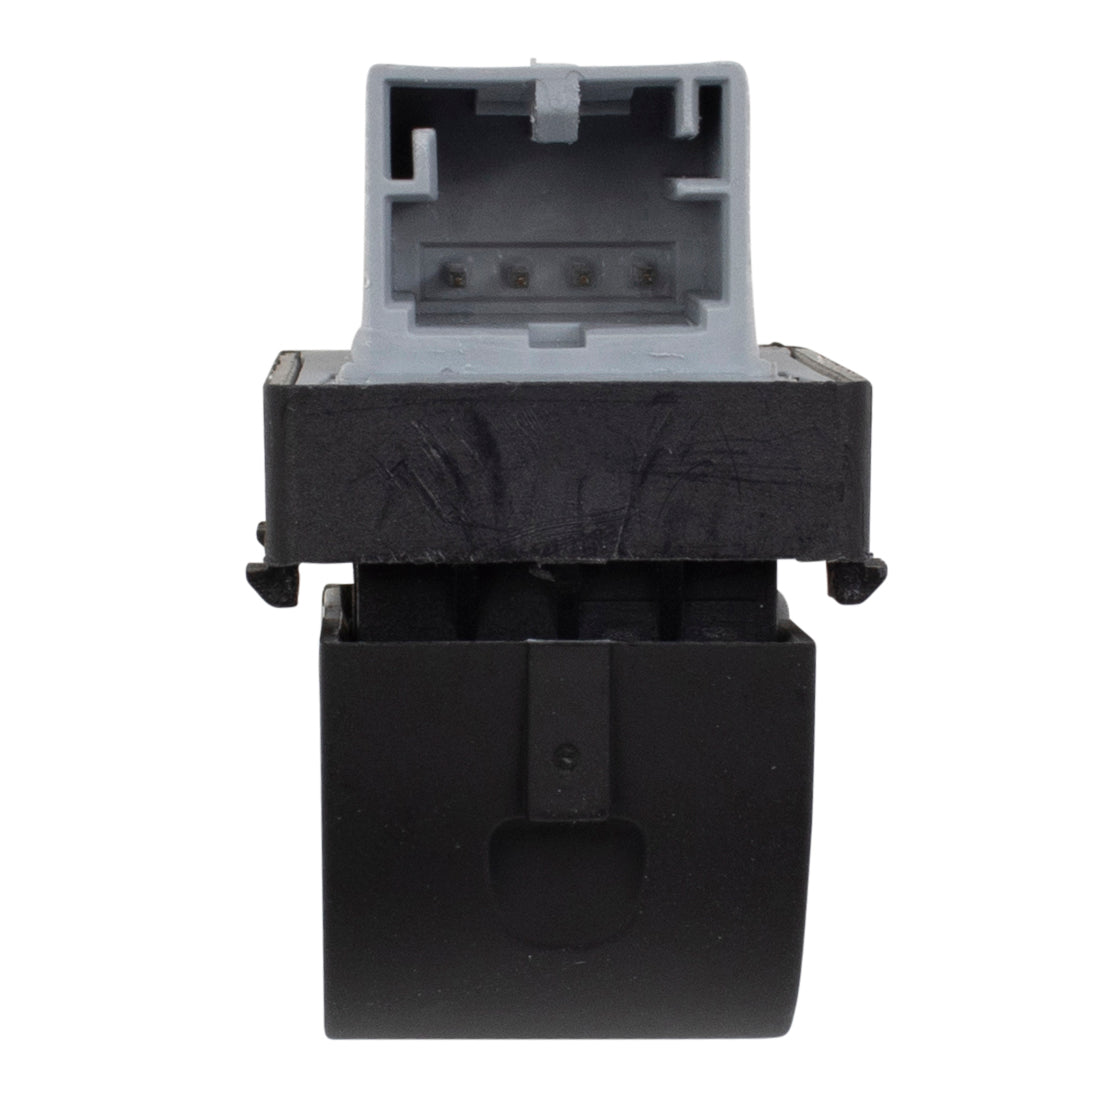 Brock Replacement Power Window Switch Compatible with 02-08 A4/S4 2003-2008 A4 Cabriolet 2008-2012 R8 2007-2008 RS4 2008 RS4 Cabriolet 2004-2008 S4 Cabriolet 2008-2009 TT 2015 TT Quattro/TTS Quattro